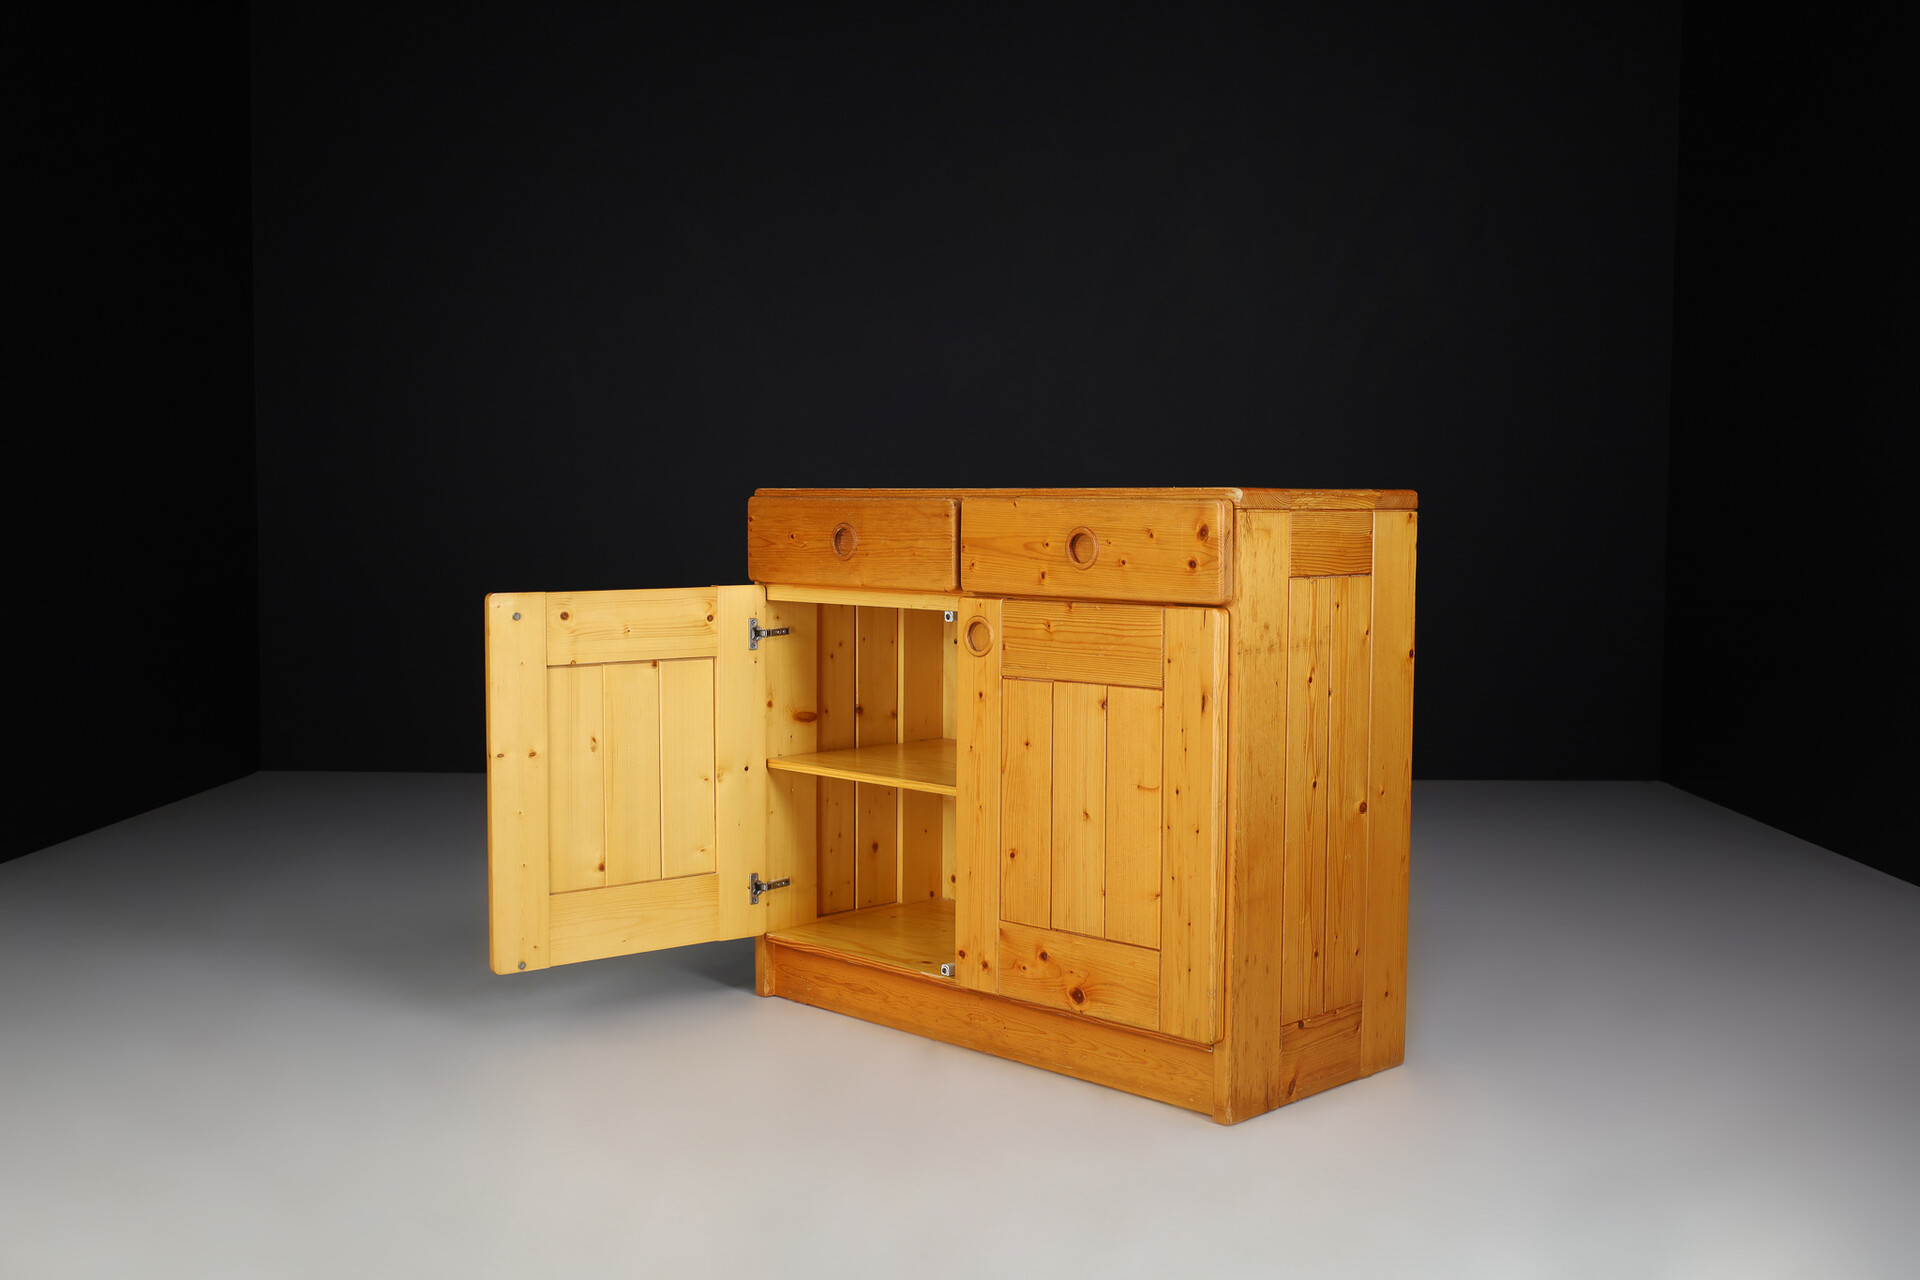 Mid century modern Pine cabinet or cupboard by Charlotte Perriand for Les Arcs, France 1960s Mid-20th century